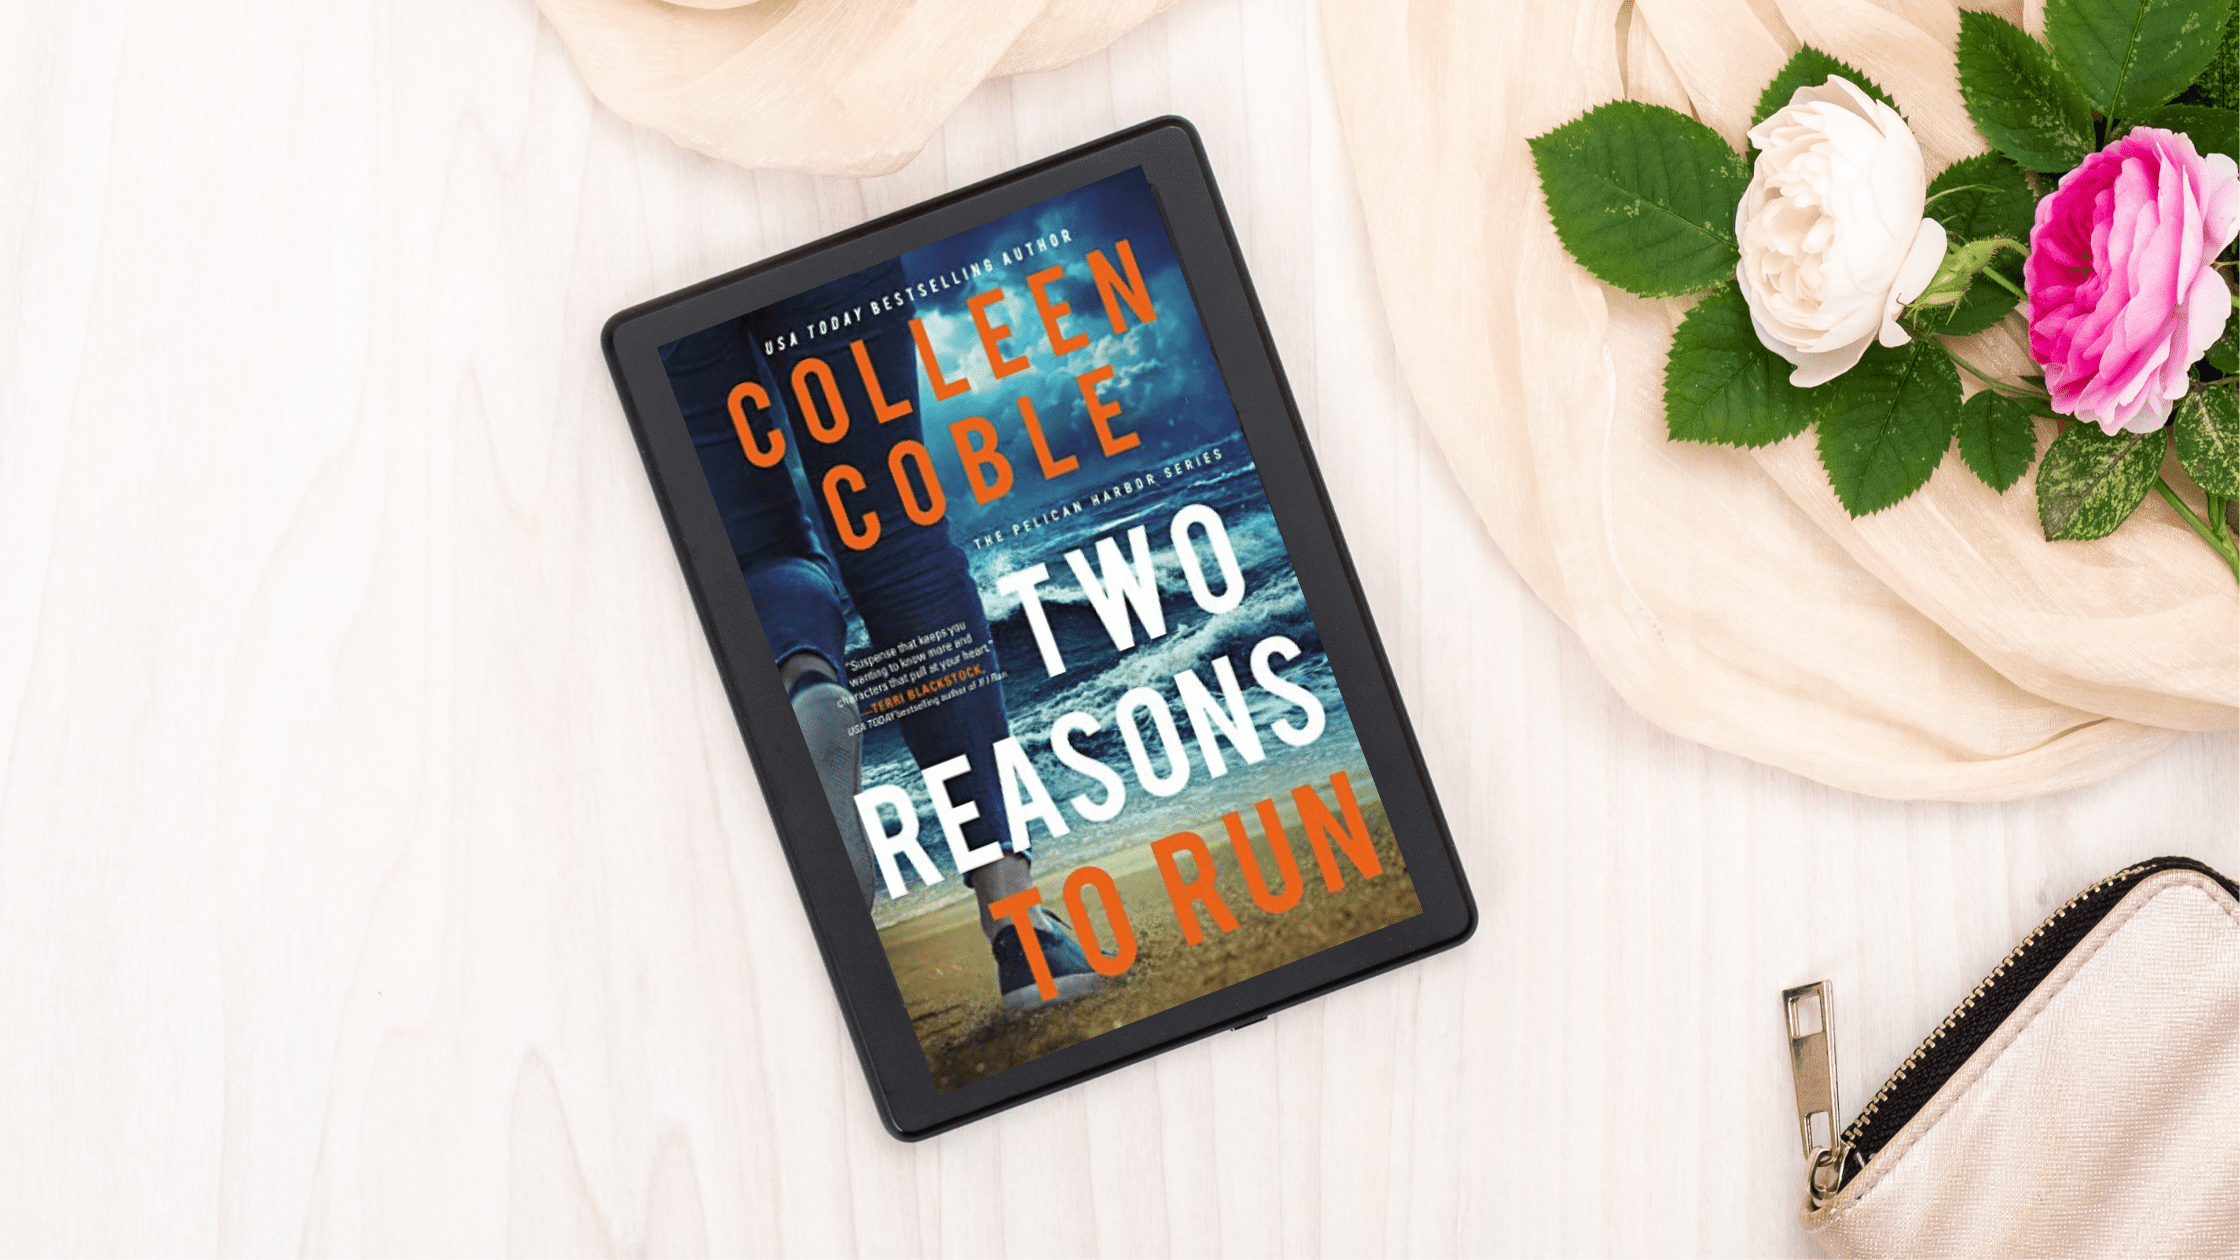 Book Review: Two Reasons to Run by Colleen Coble